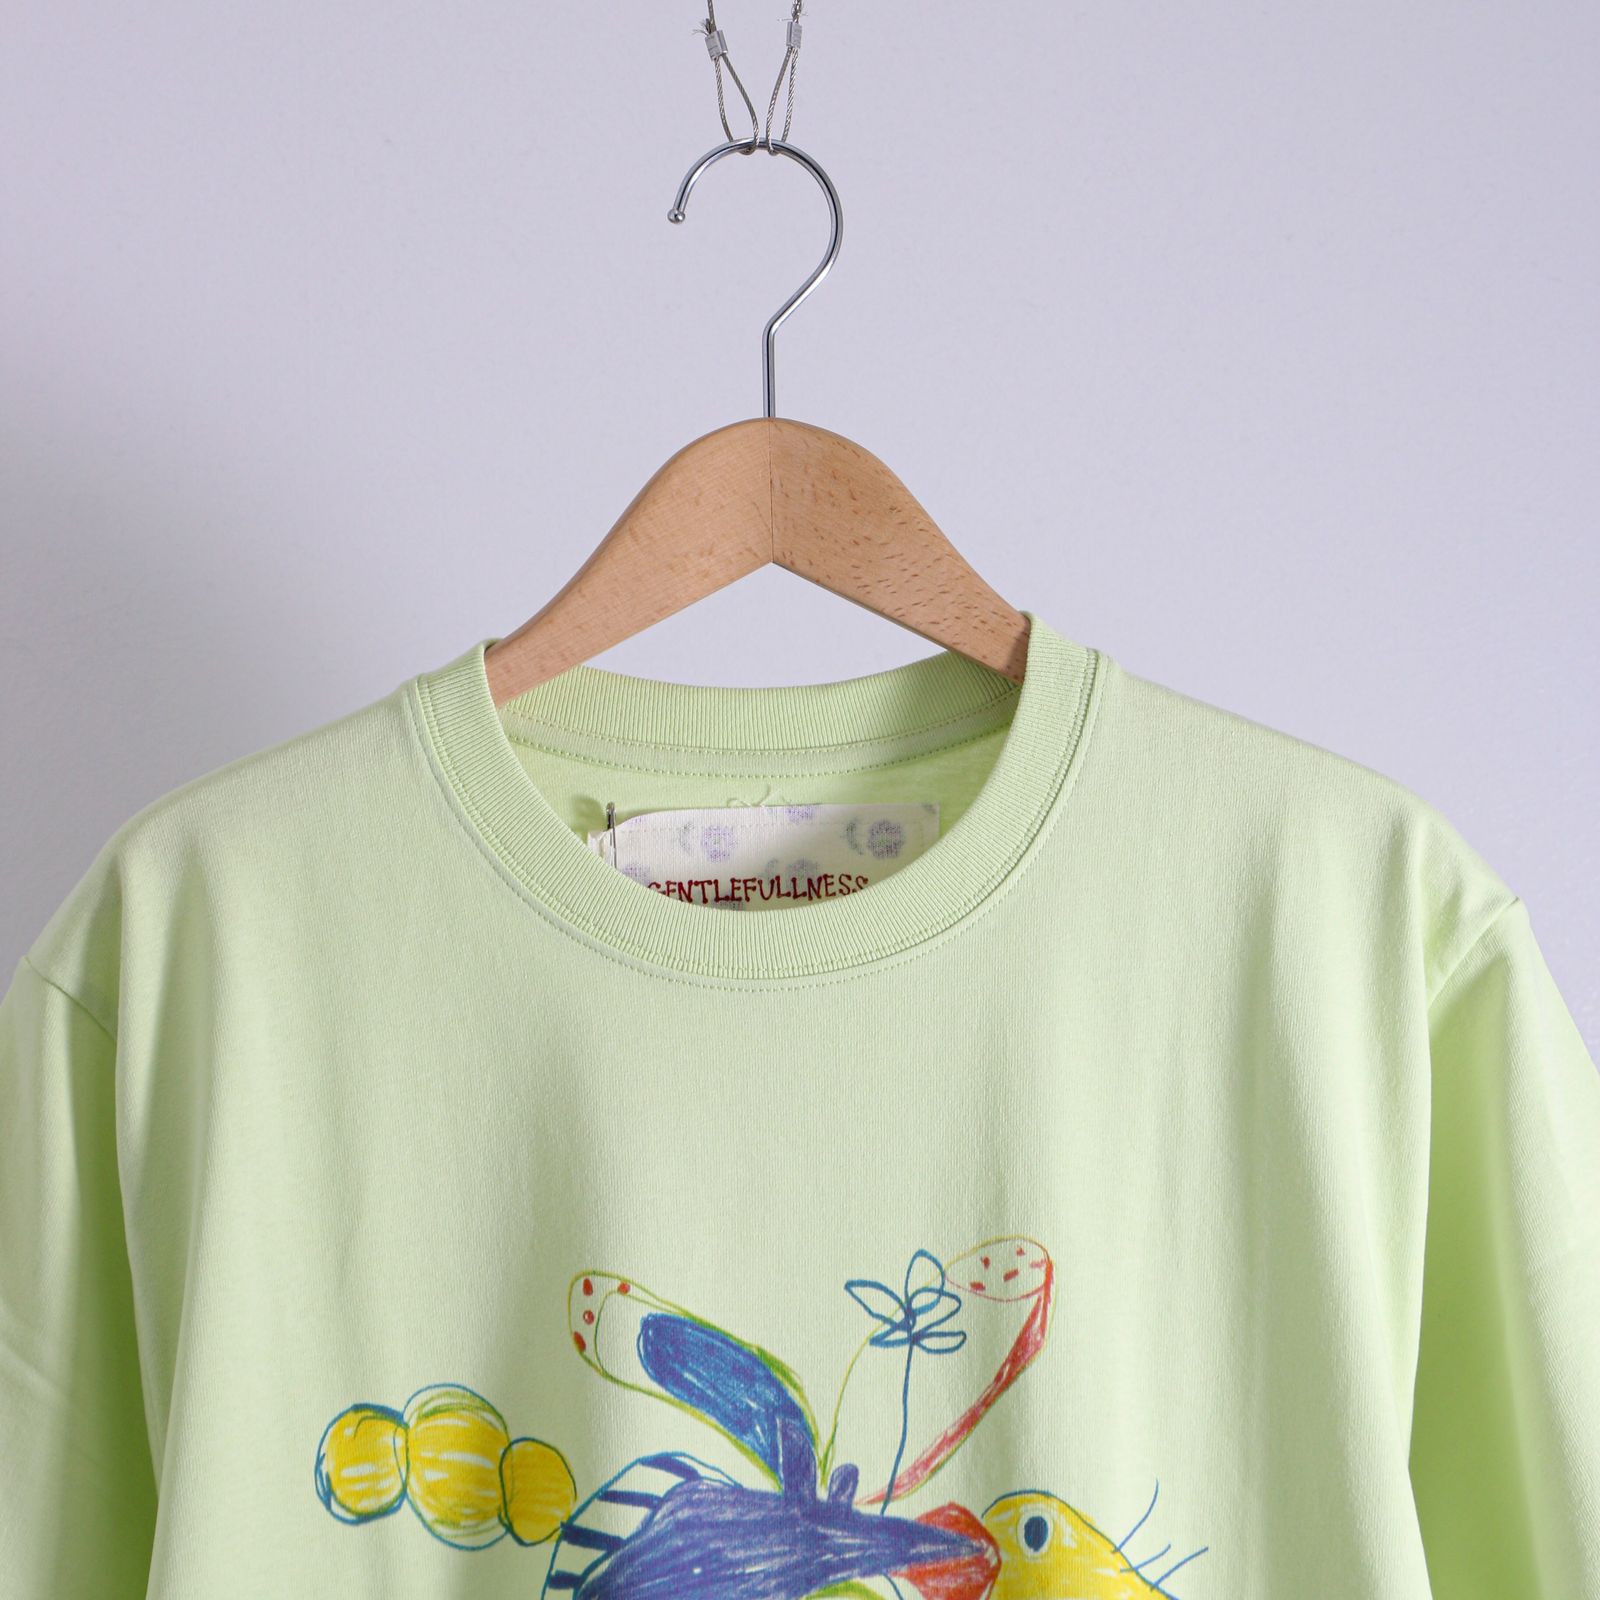 GENTLE FULLNESS - Recycled Cotton SS Tee PISTACHIO DRAGONFLY 